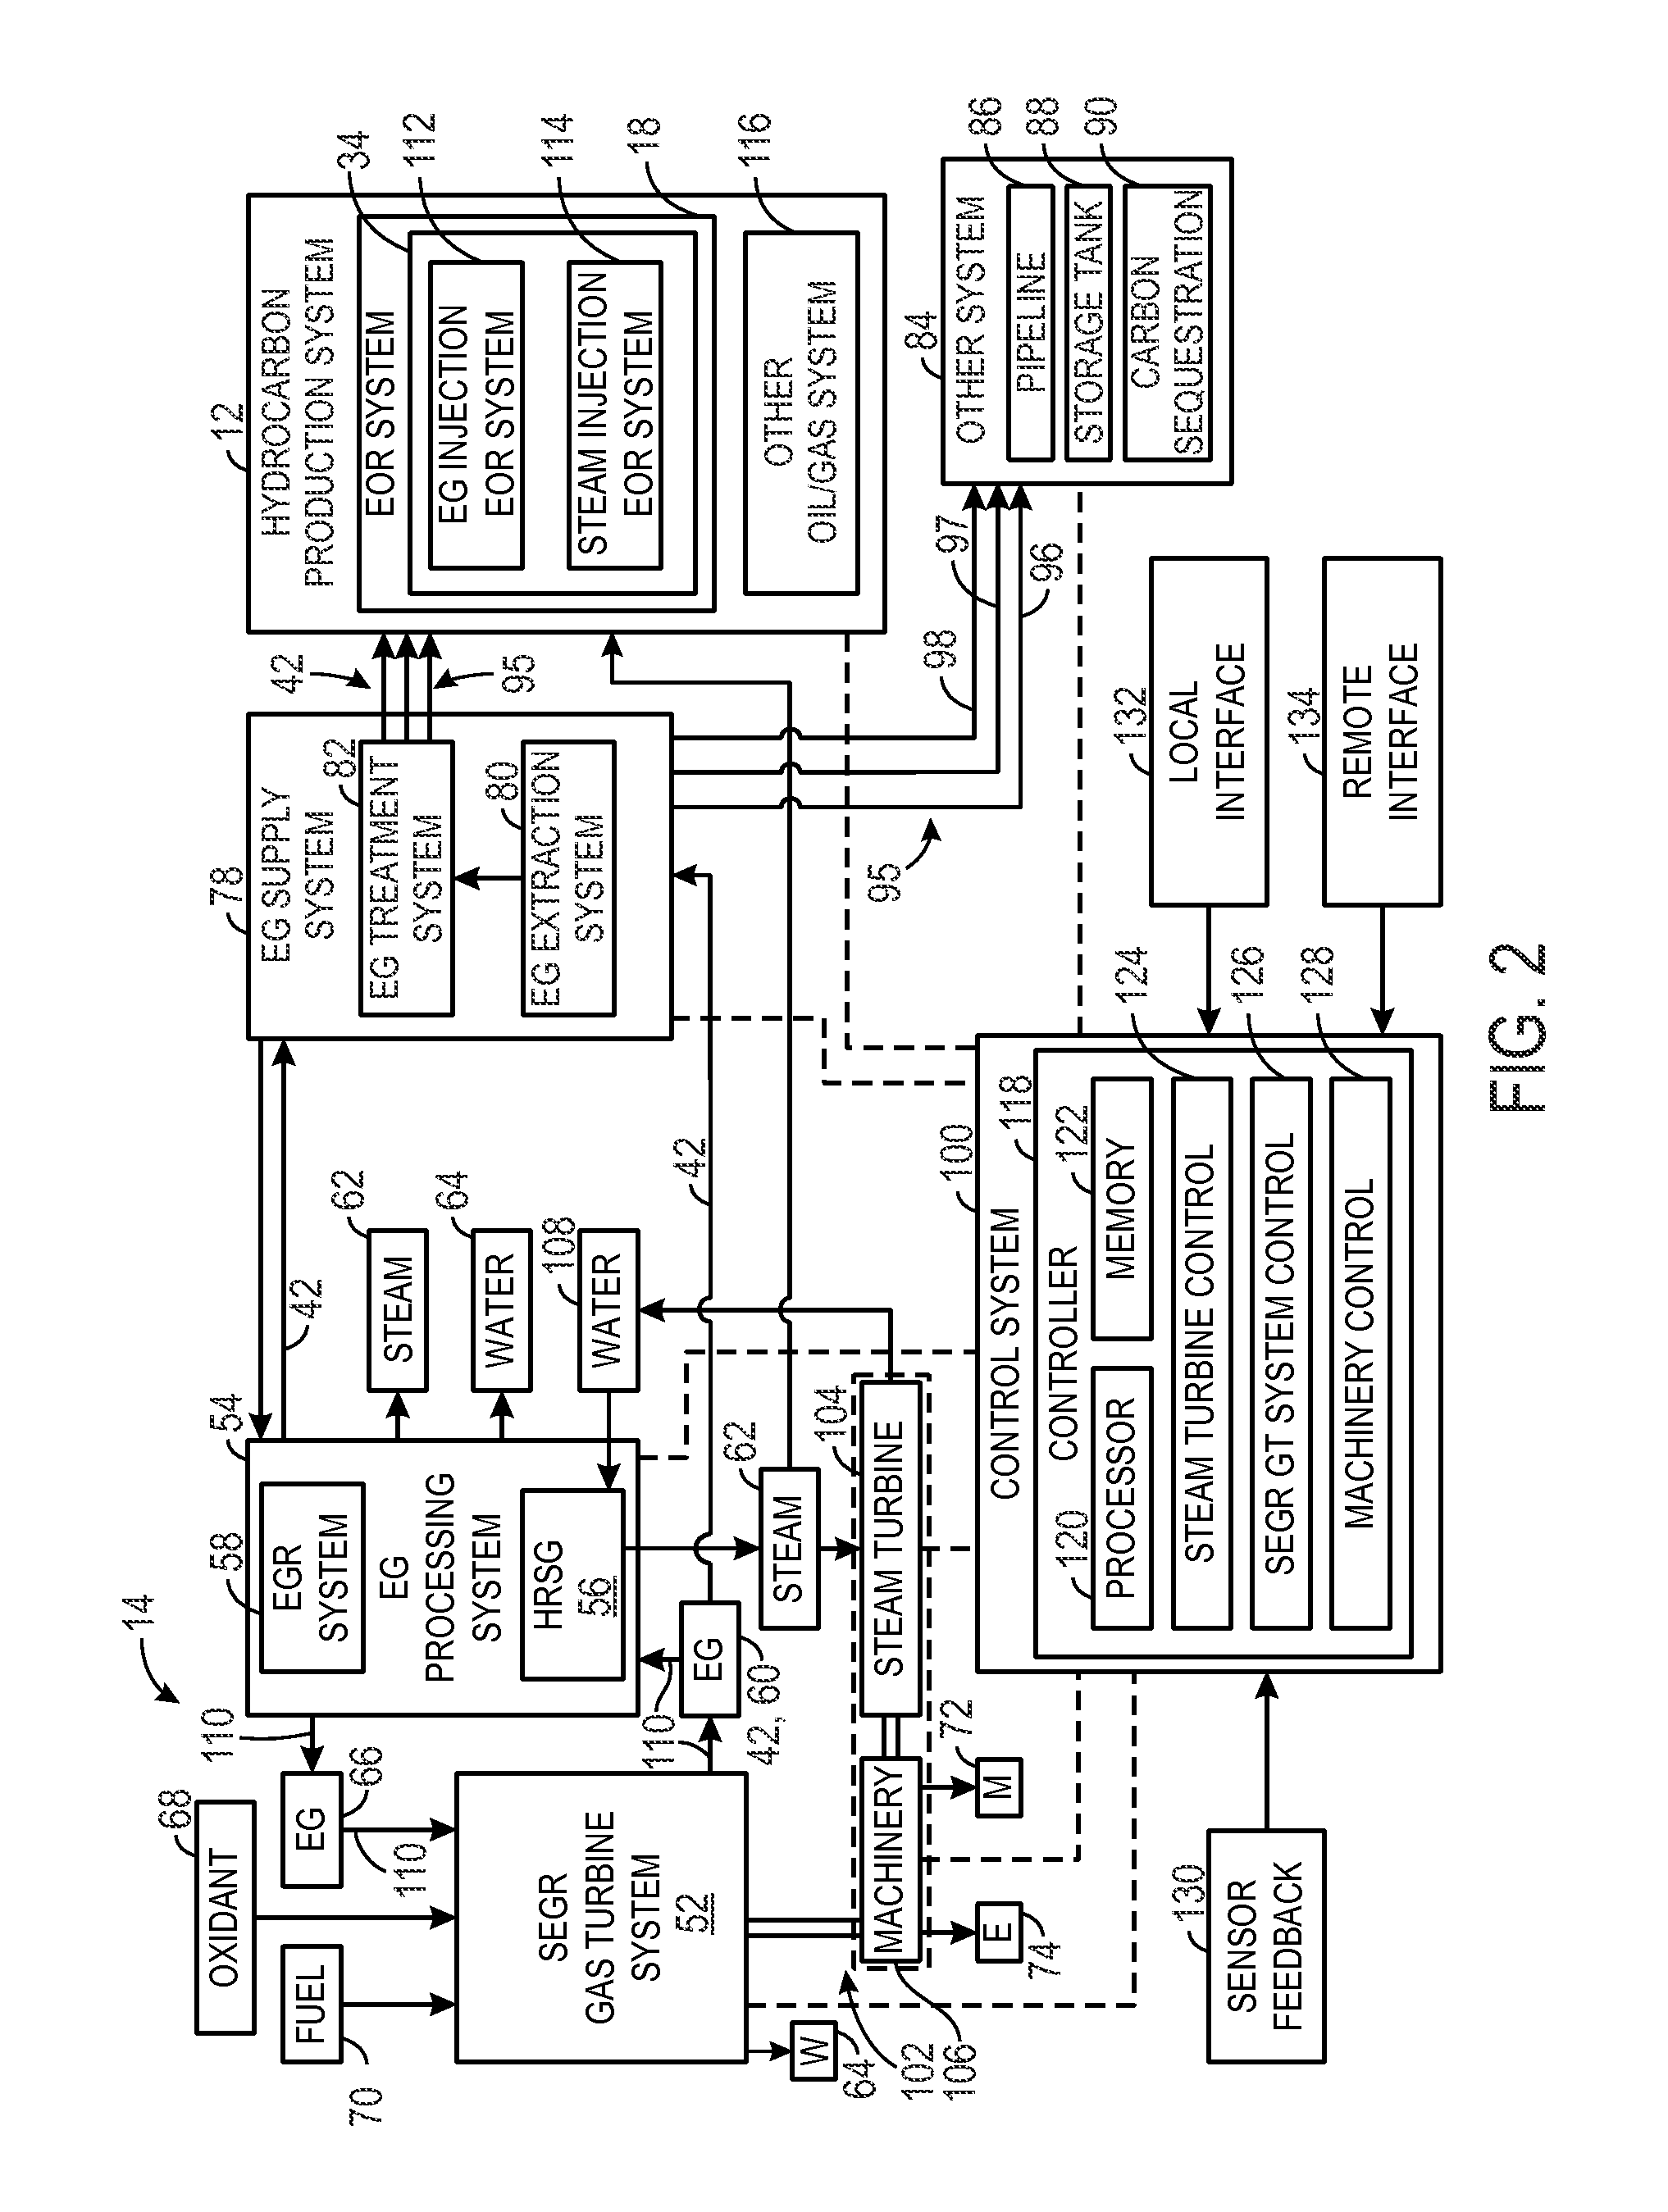 System and method for a turbine combustor